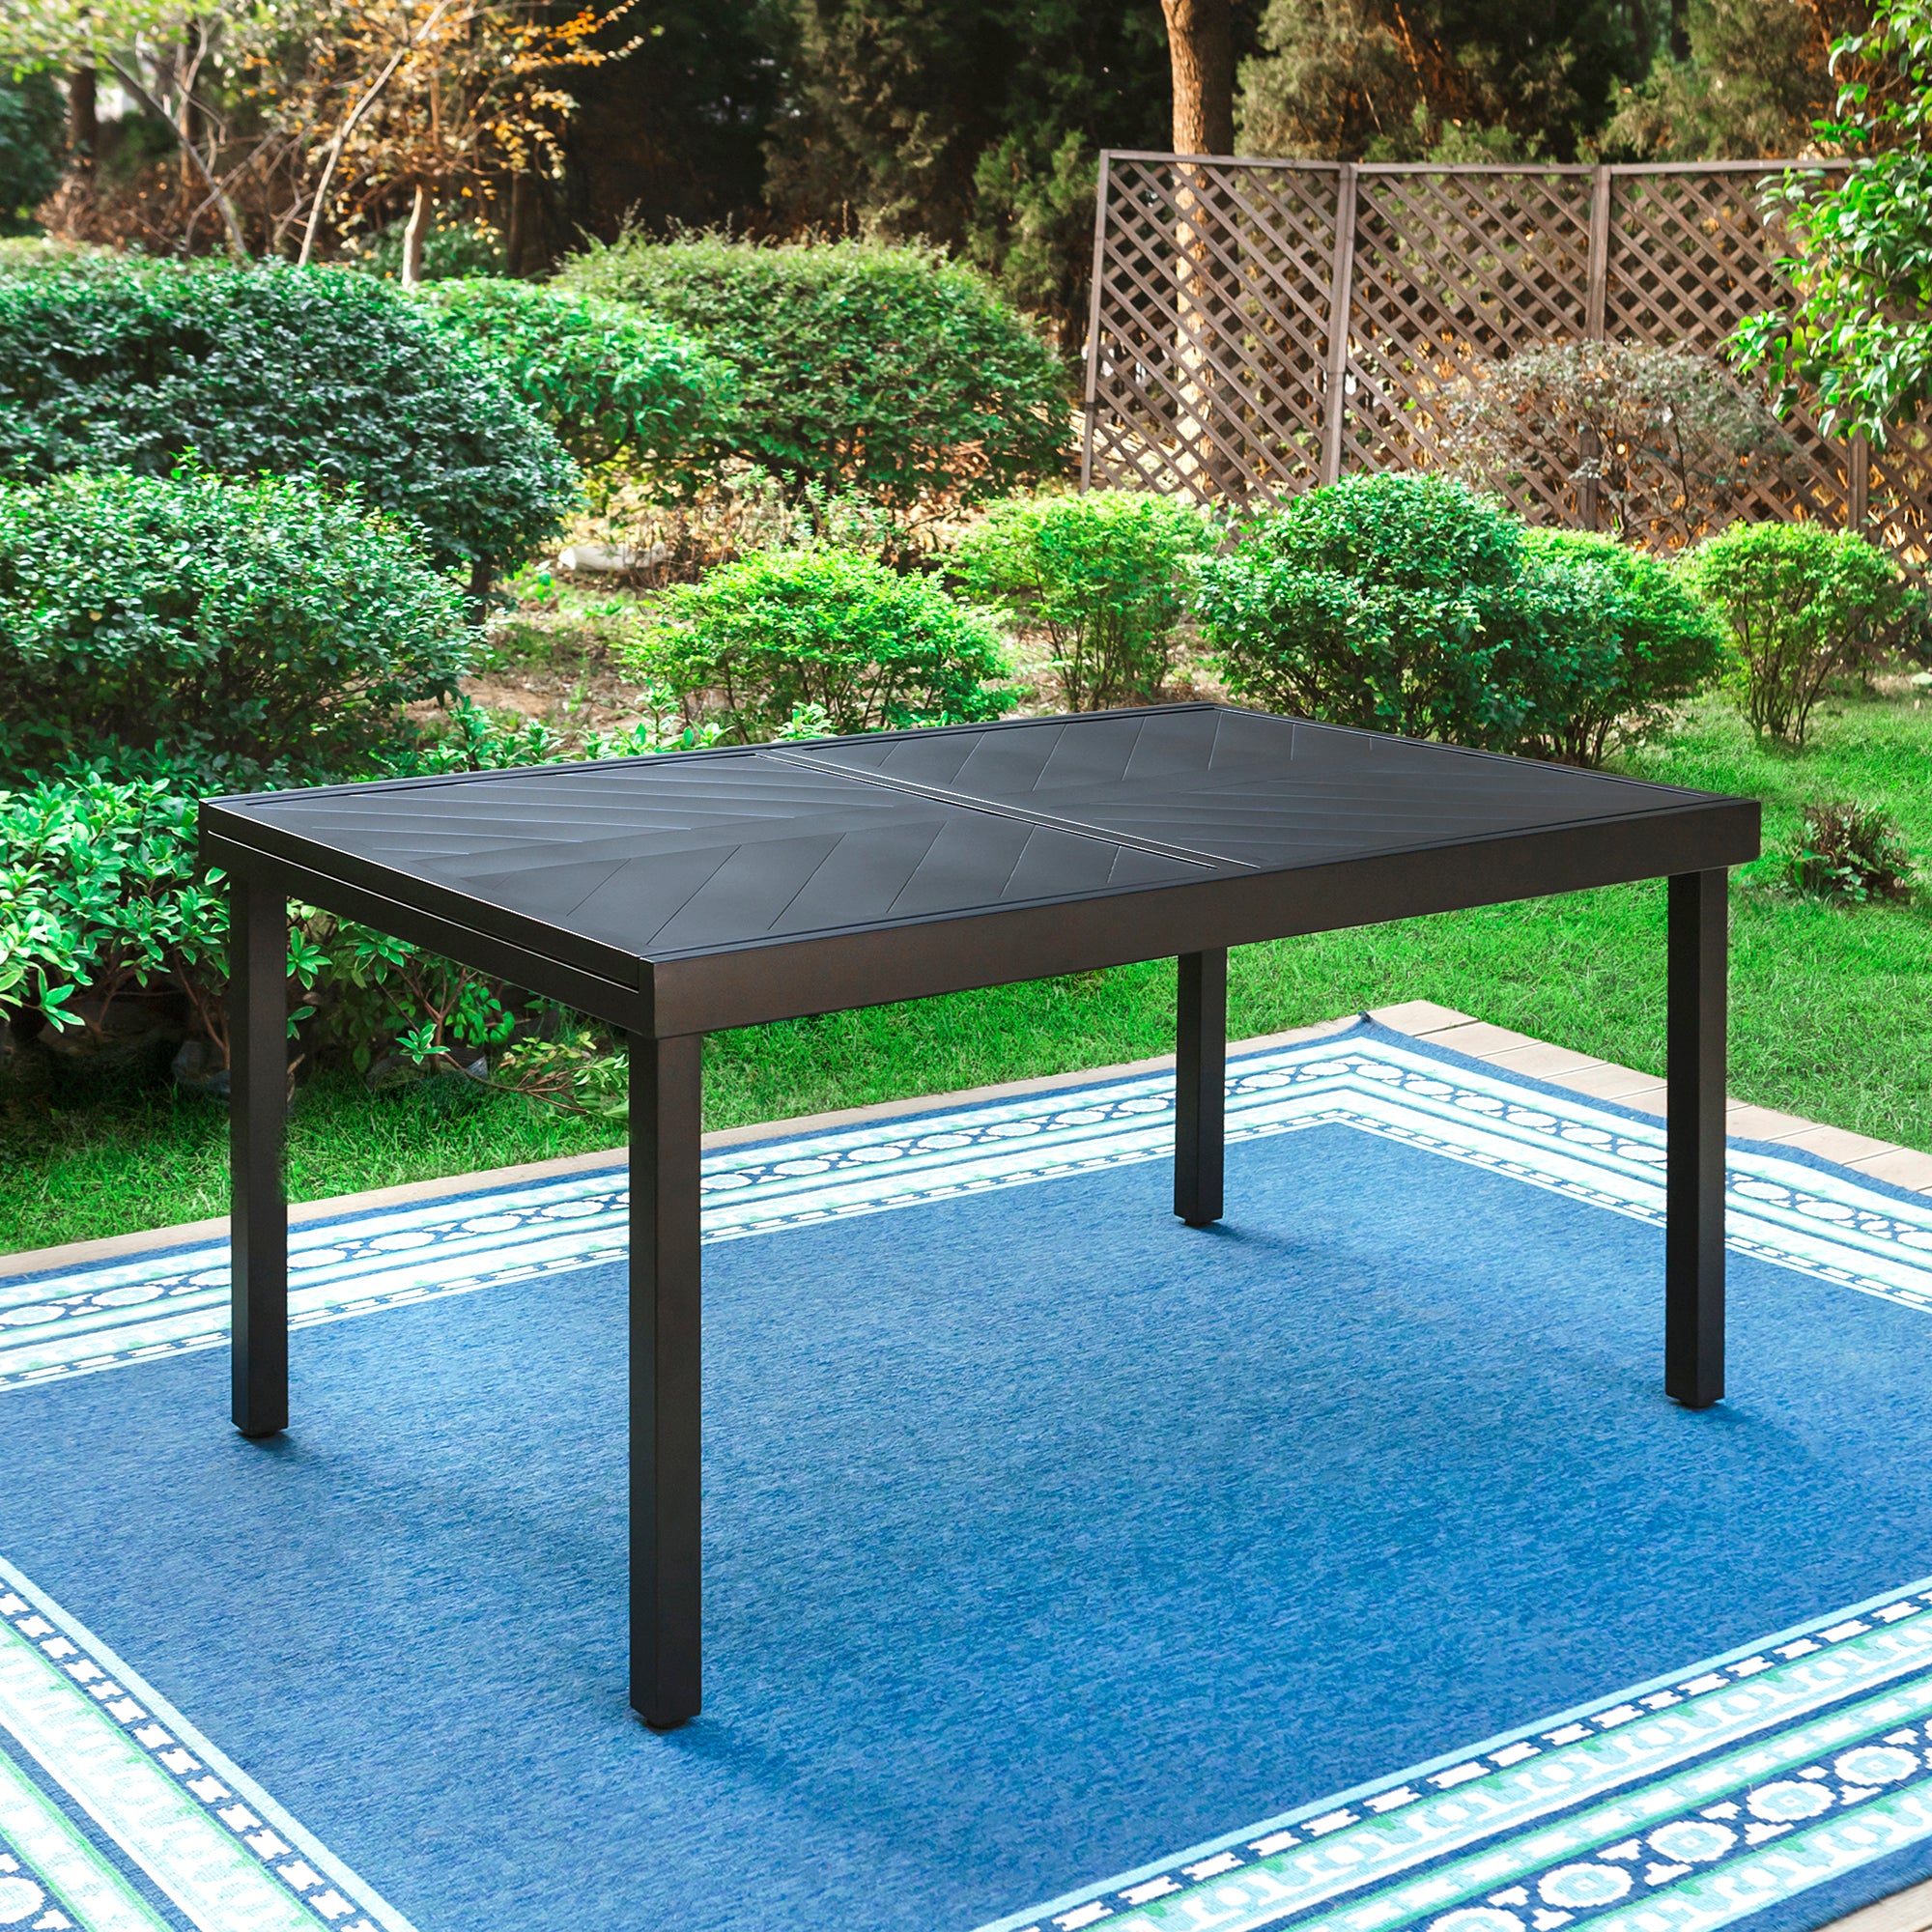 PHI VILLA Extra Large Extendable Table with Line Engraving Design